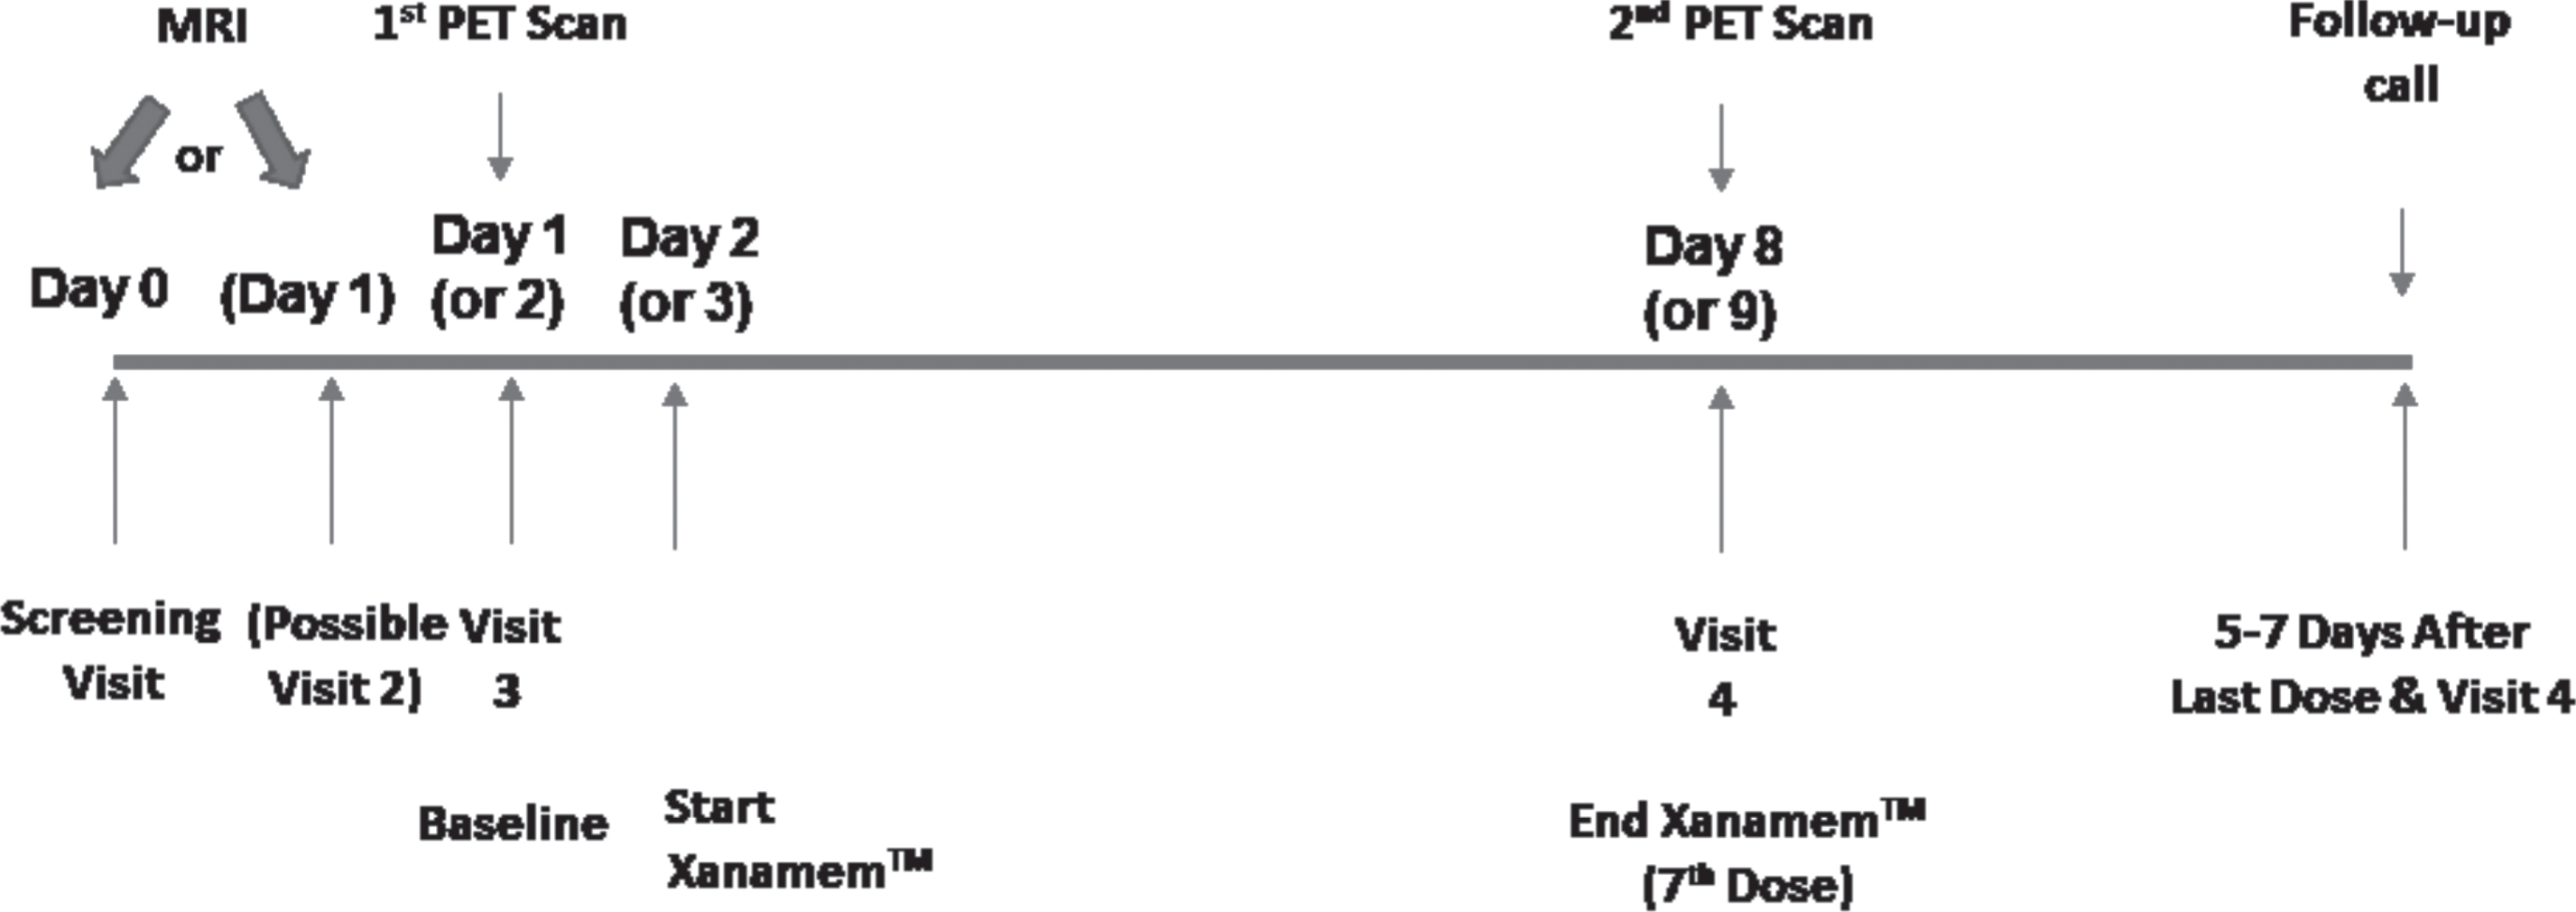 Timeline for the study. The study timeline is depicted horizontally, with description of purpose of each study visit and the day of the 8-day study shown above the timeline. Study days are shown based on whether the MRI was conducted at the screening visit, or at a second study visit scheduled for the following day (shown in parentheses). Below the timeline are the study visit number, and cardinal study milestones.